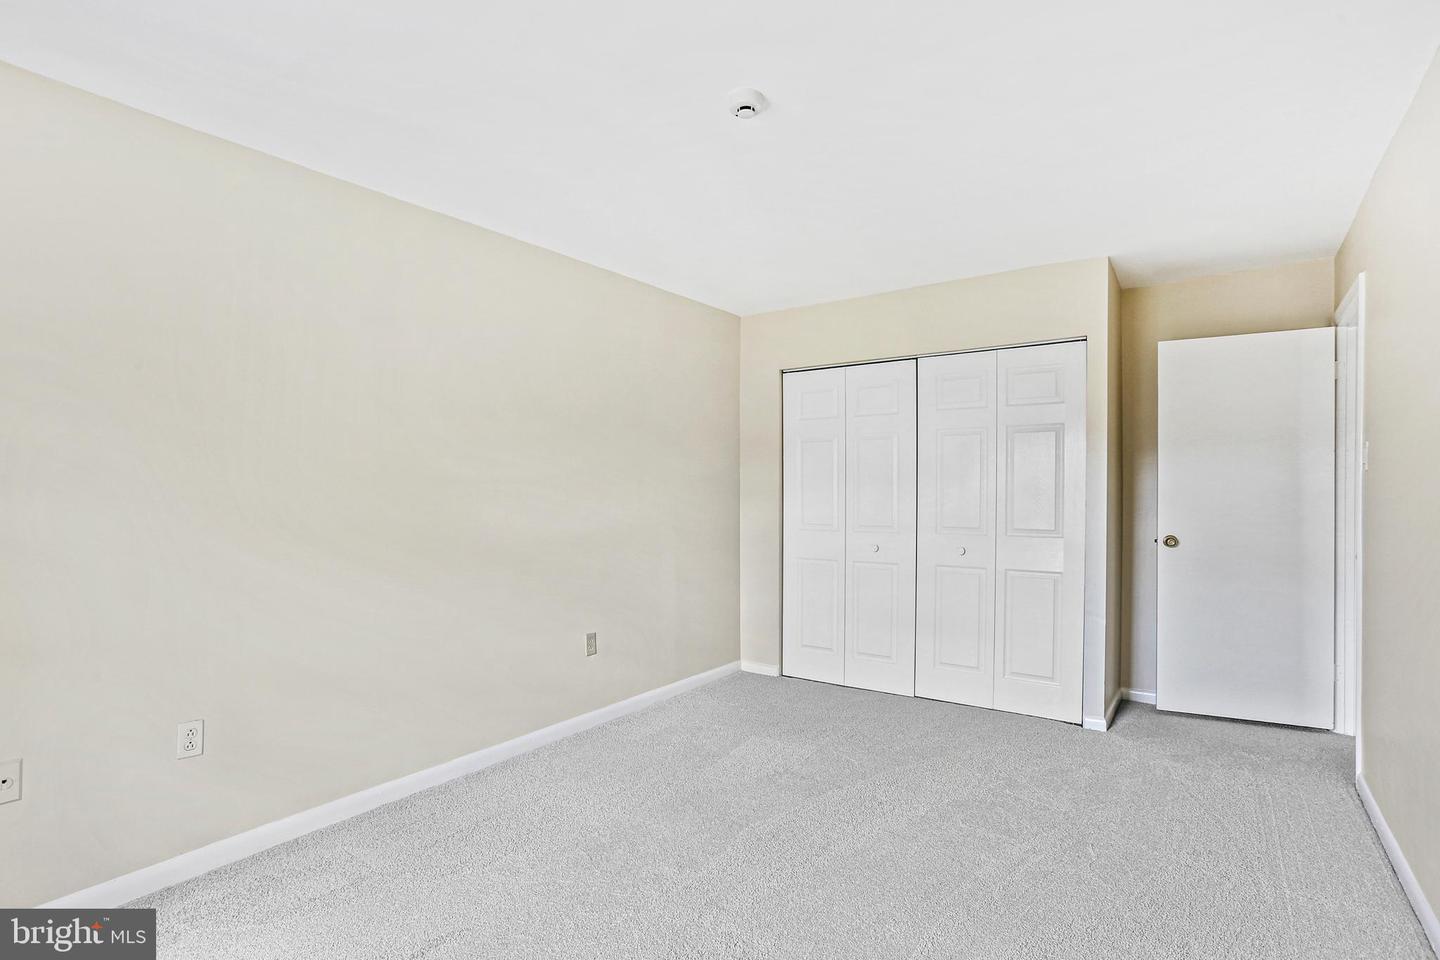 Photo 13 of 23 of 9220 Bridle Path Ln #L townhome